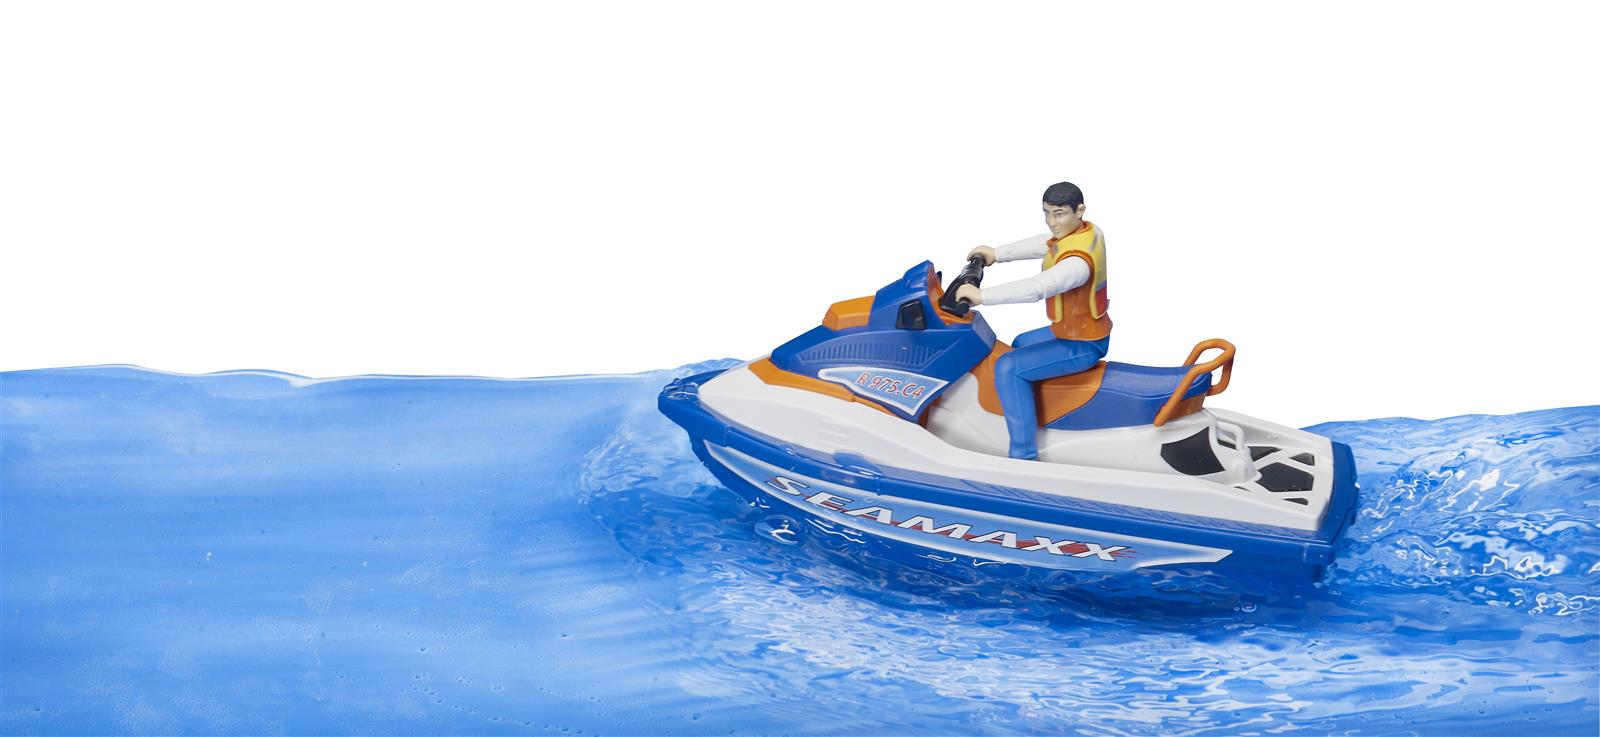 Bruder Personal Water Craft med chauffør